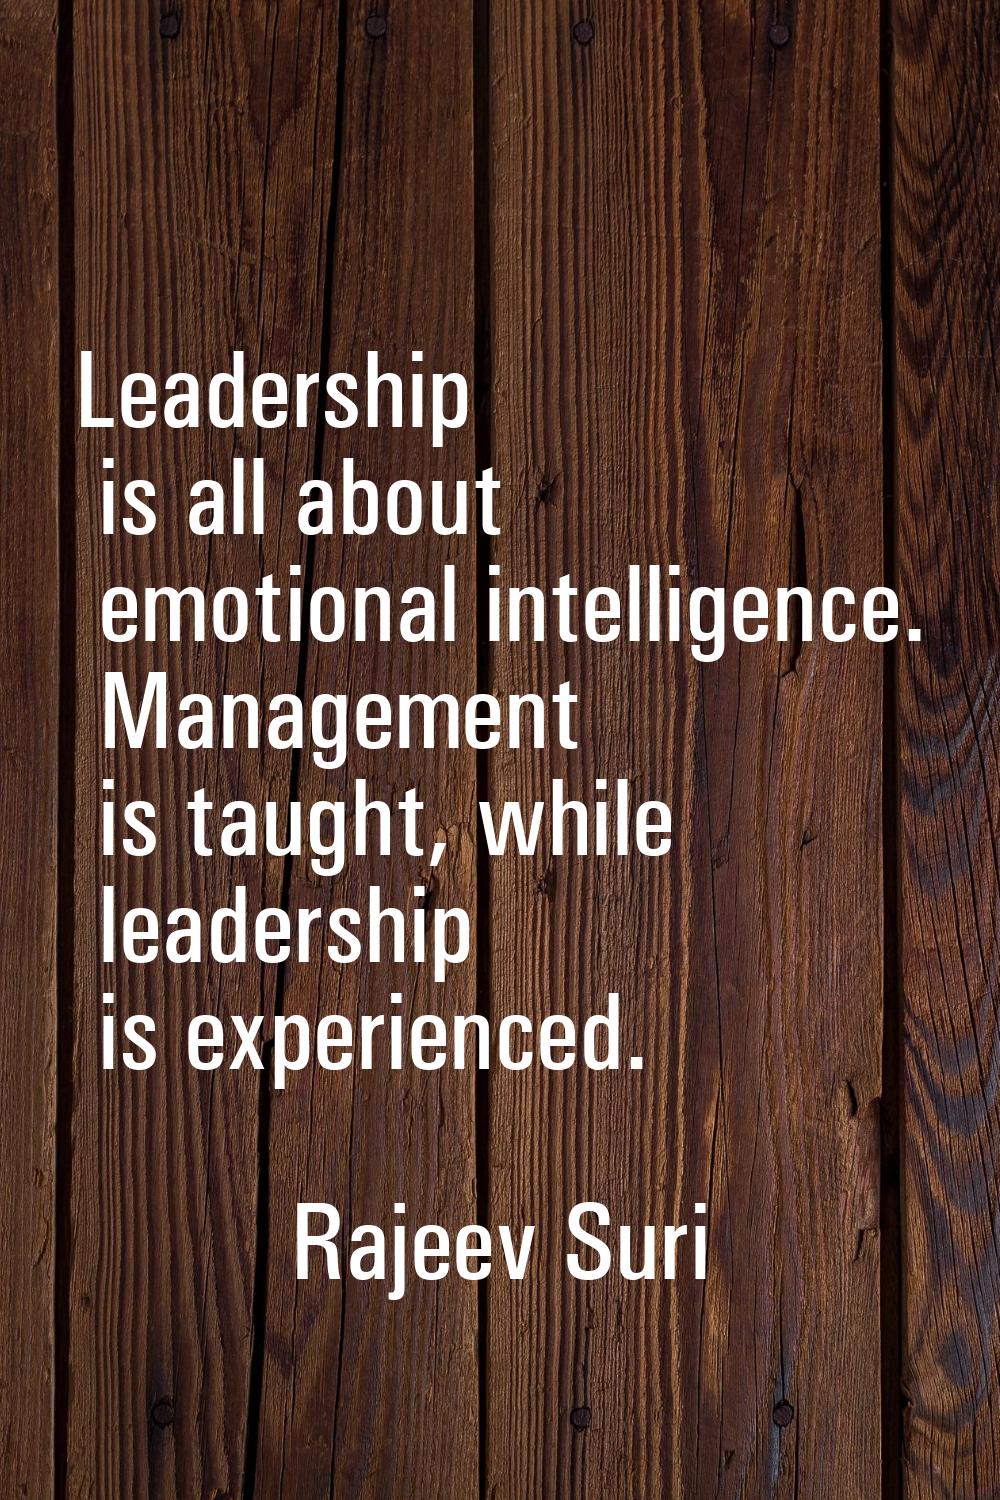 Leadership is all about emotional intelligence. Management is taught, while leadership is experienc